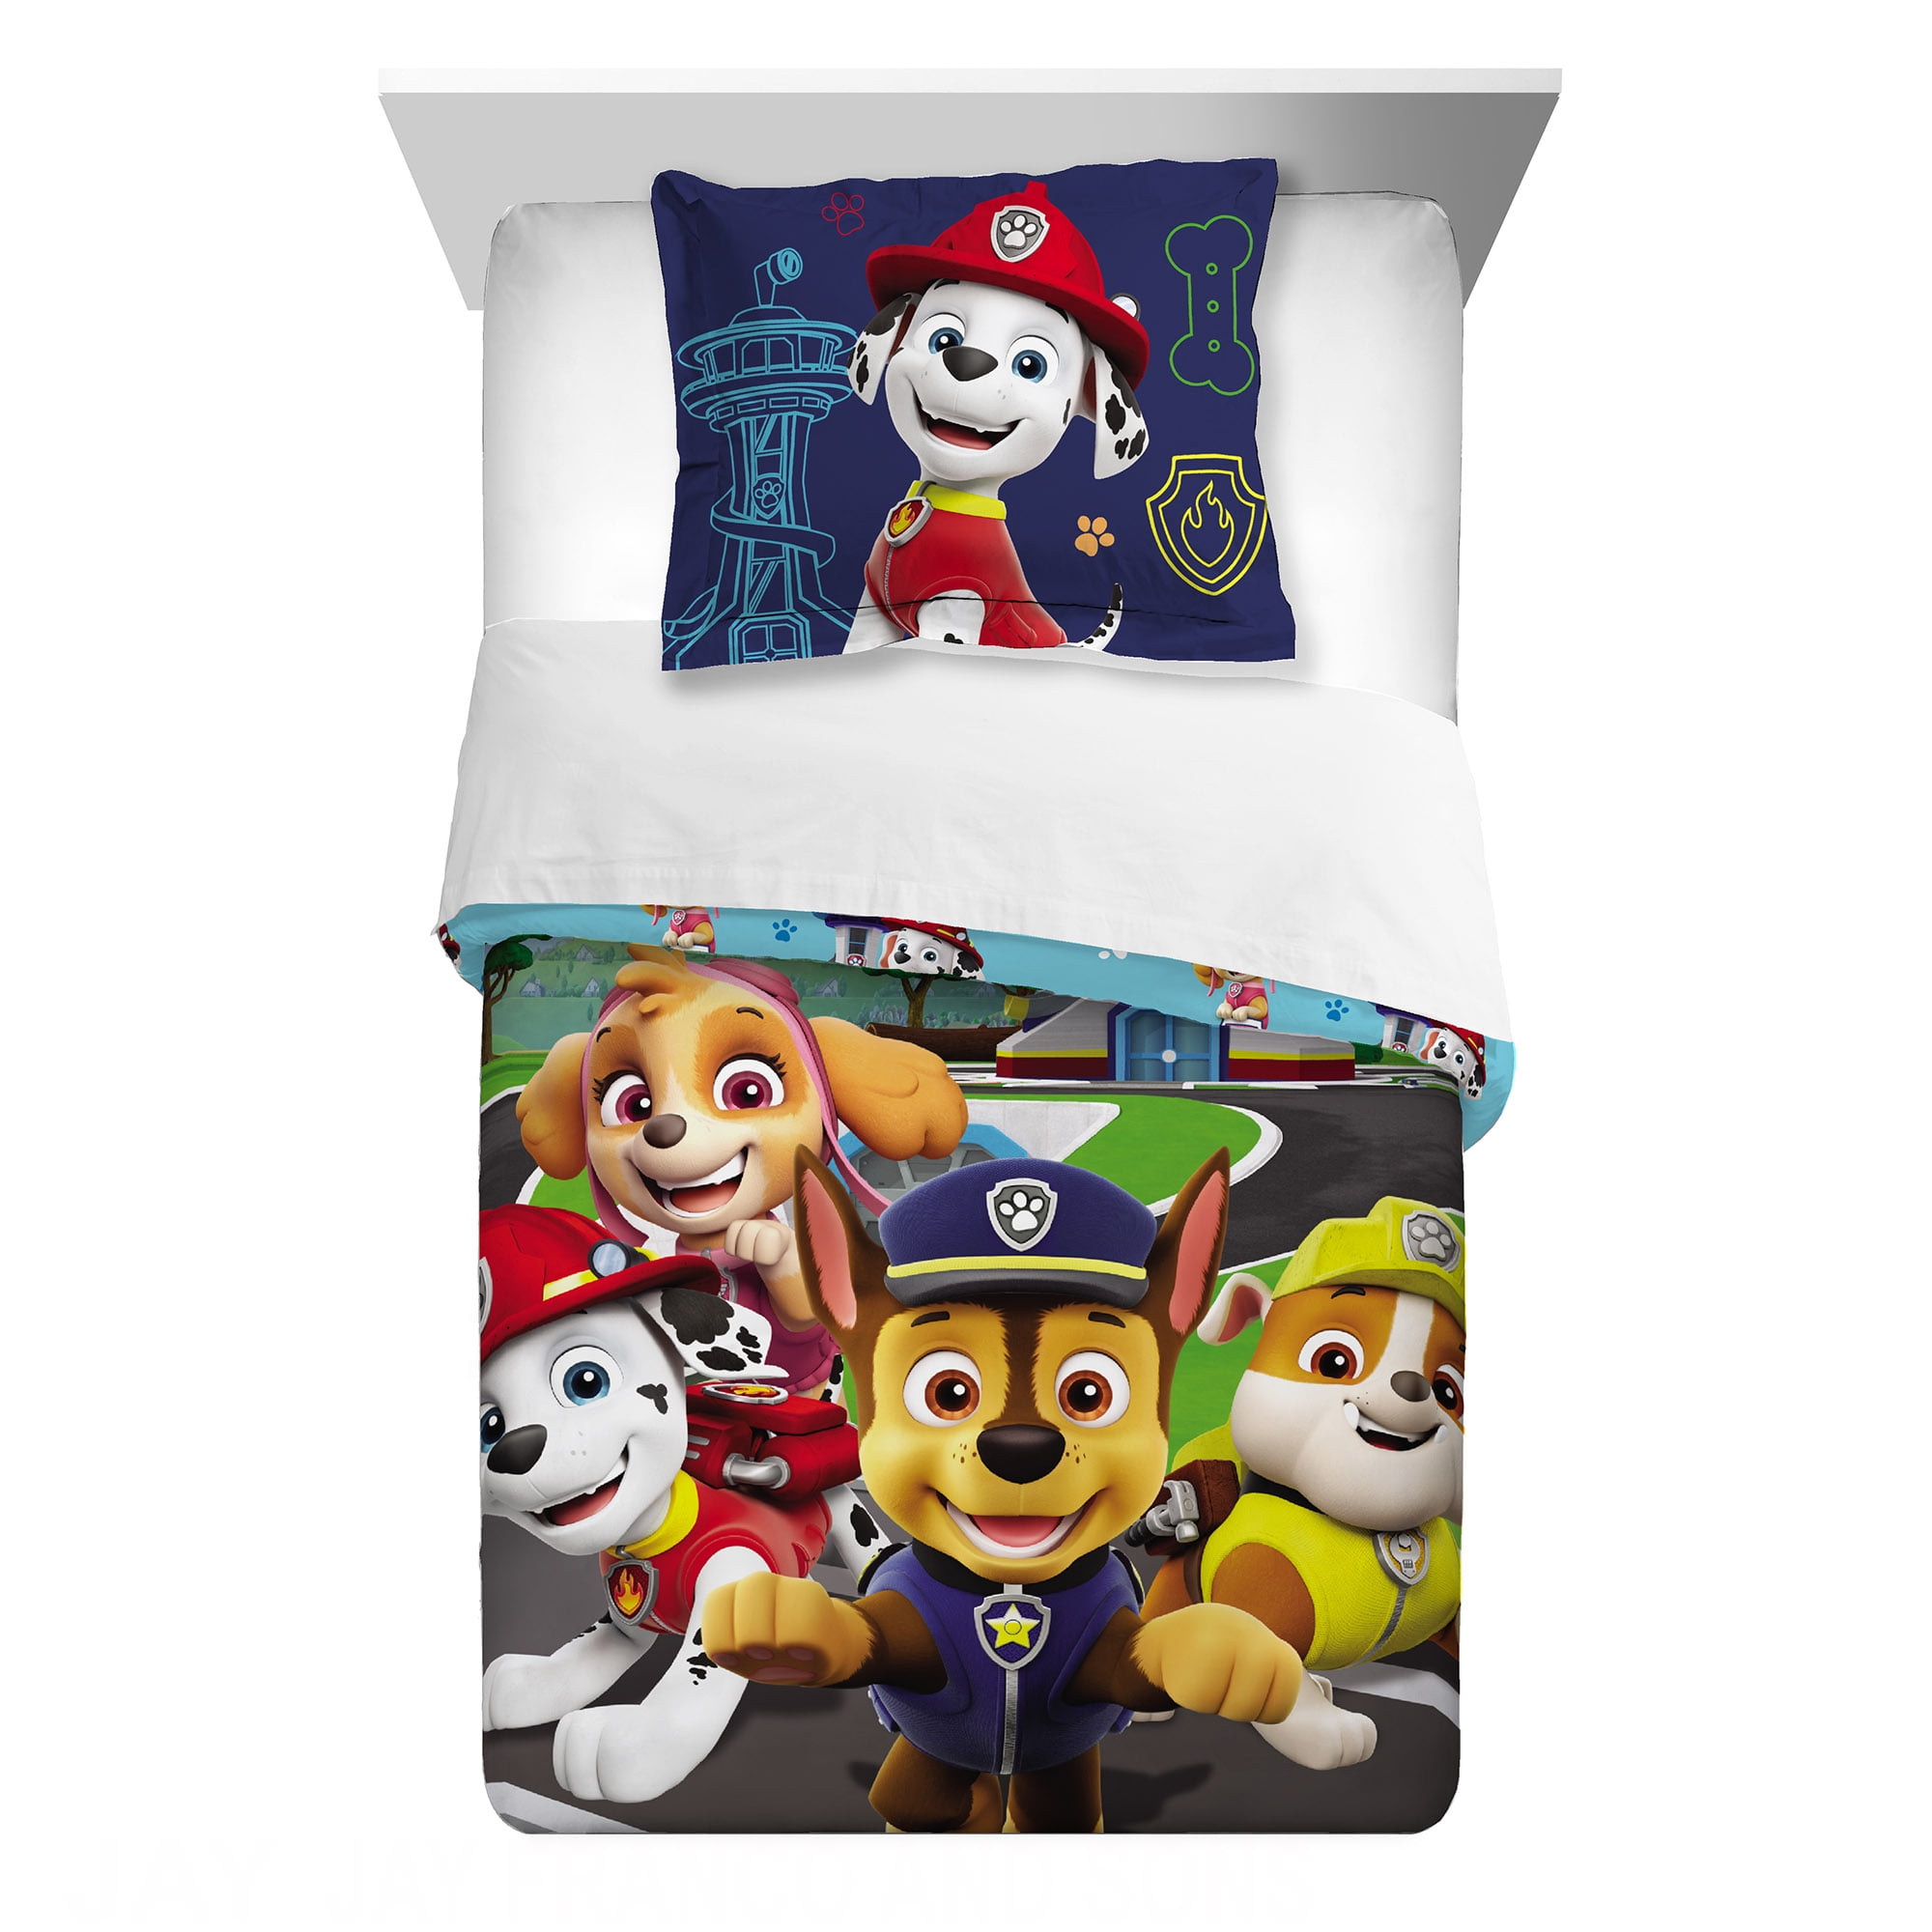 DOUBLE COT BED SIZE NEW PAW PATROL DUVET QUILT COVER SET GIRLS BOYS IN SINGLE 